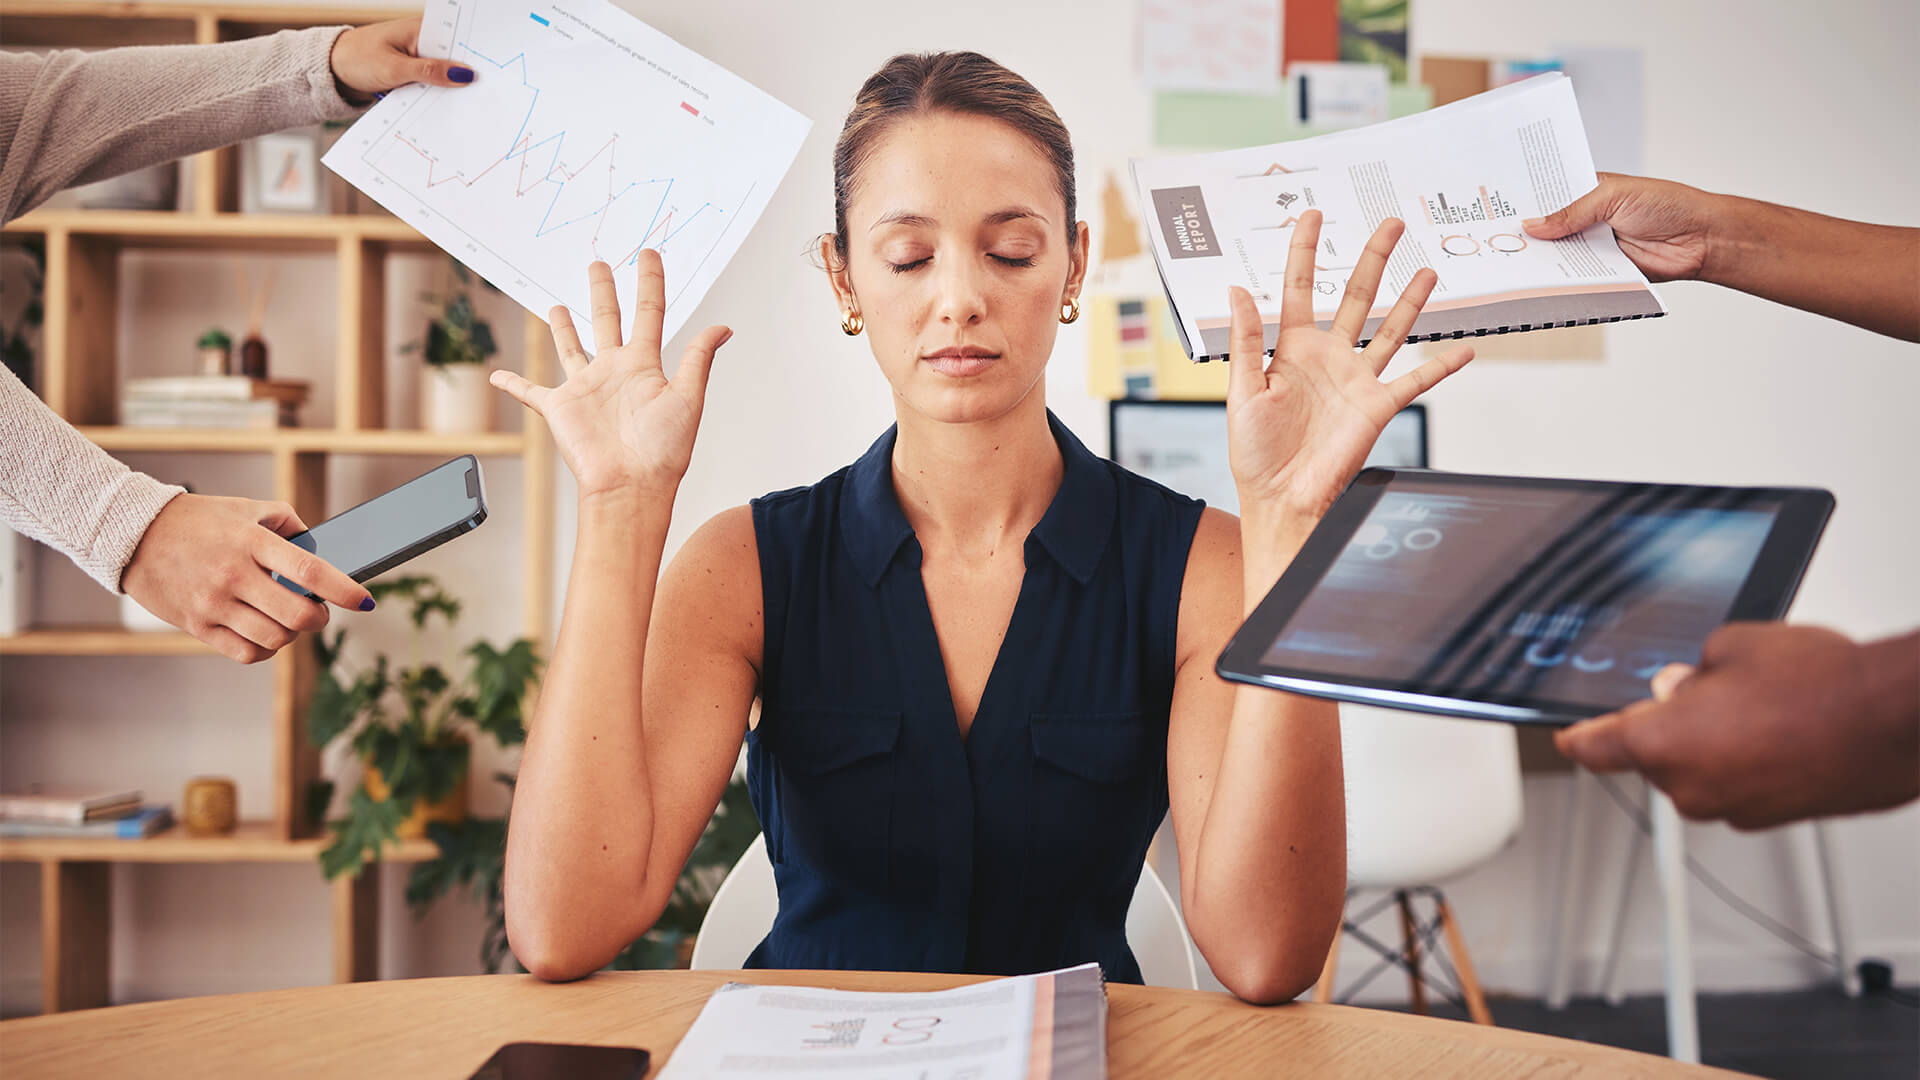 How C-Suite Leaders Can Manage Occupational Stress and Stay Motivated